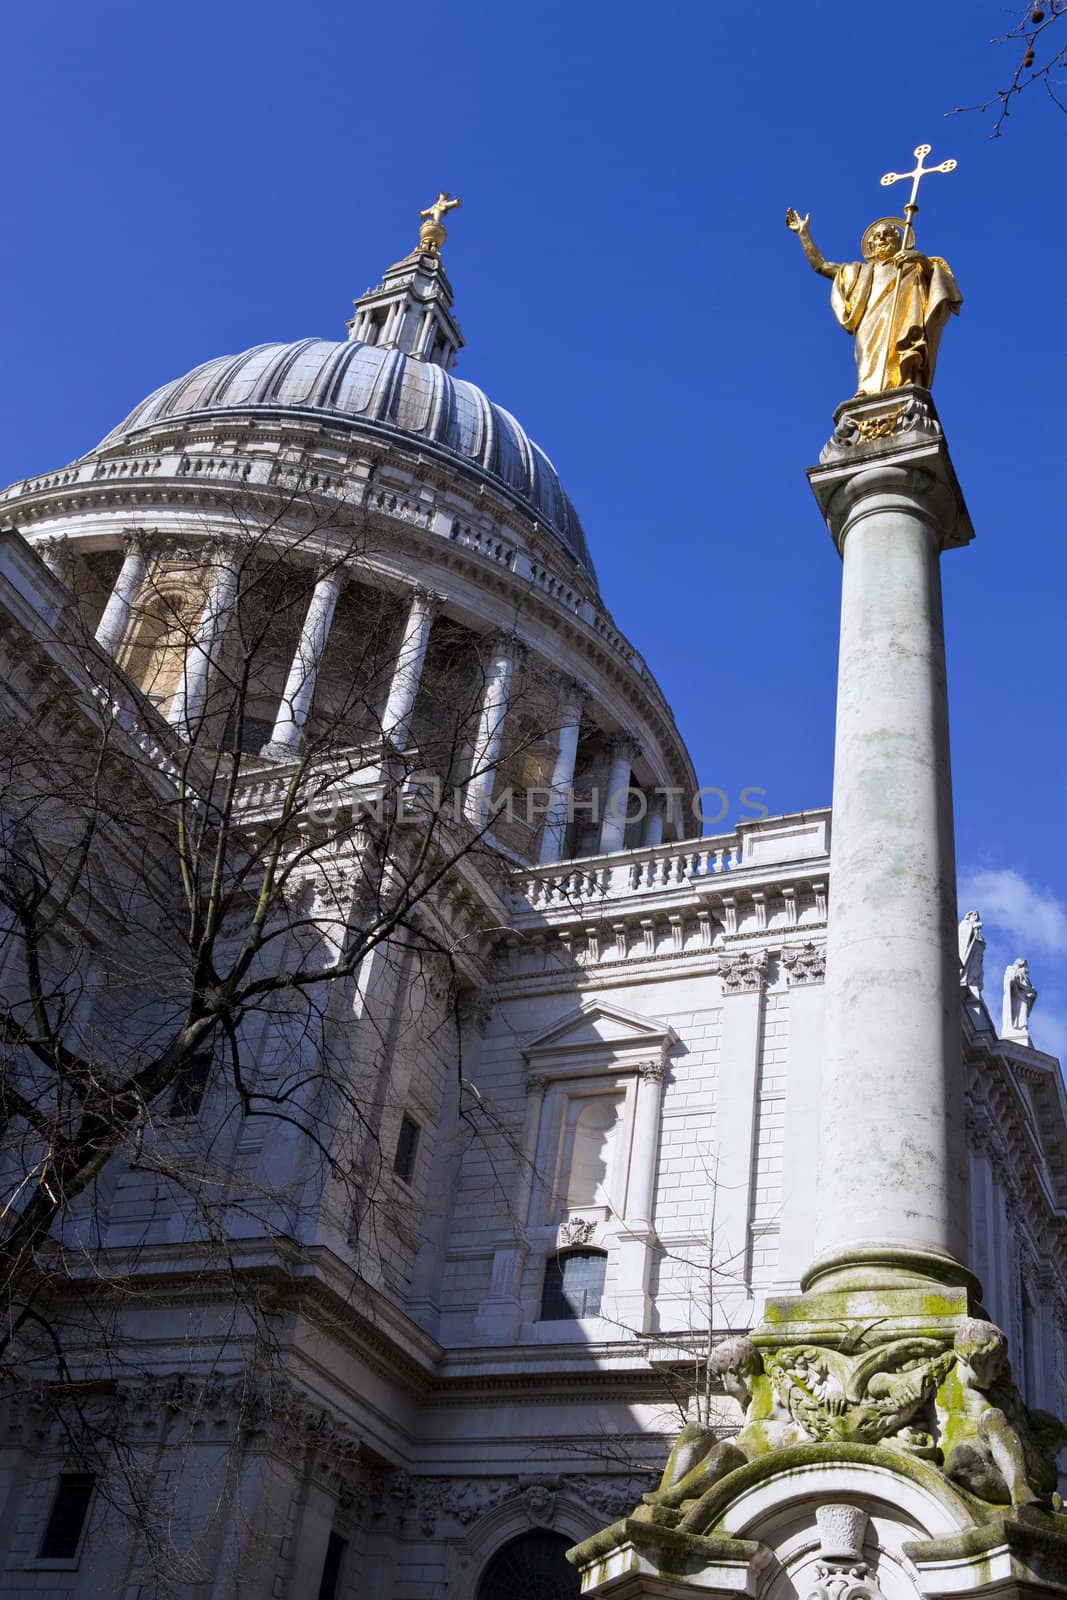 The impressive St. Paul's Cathedral and the Statue of Saint Paul in London.